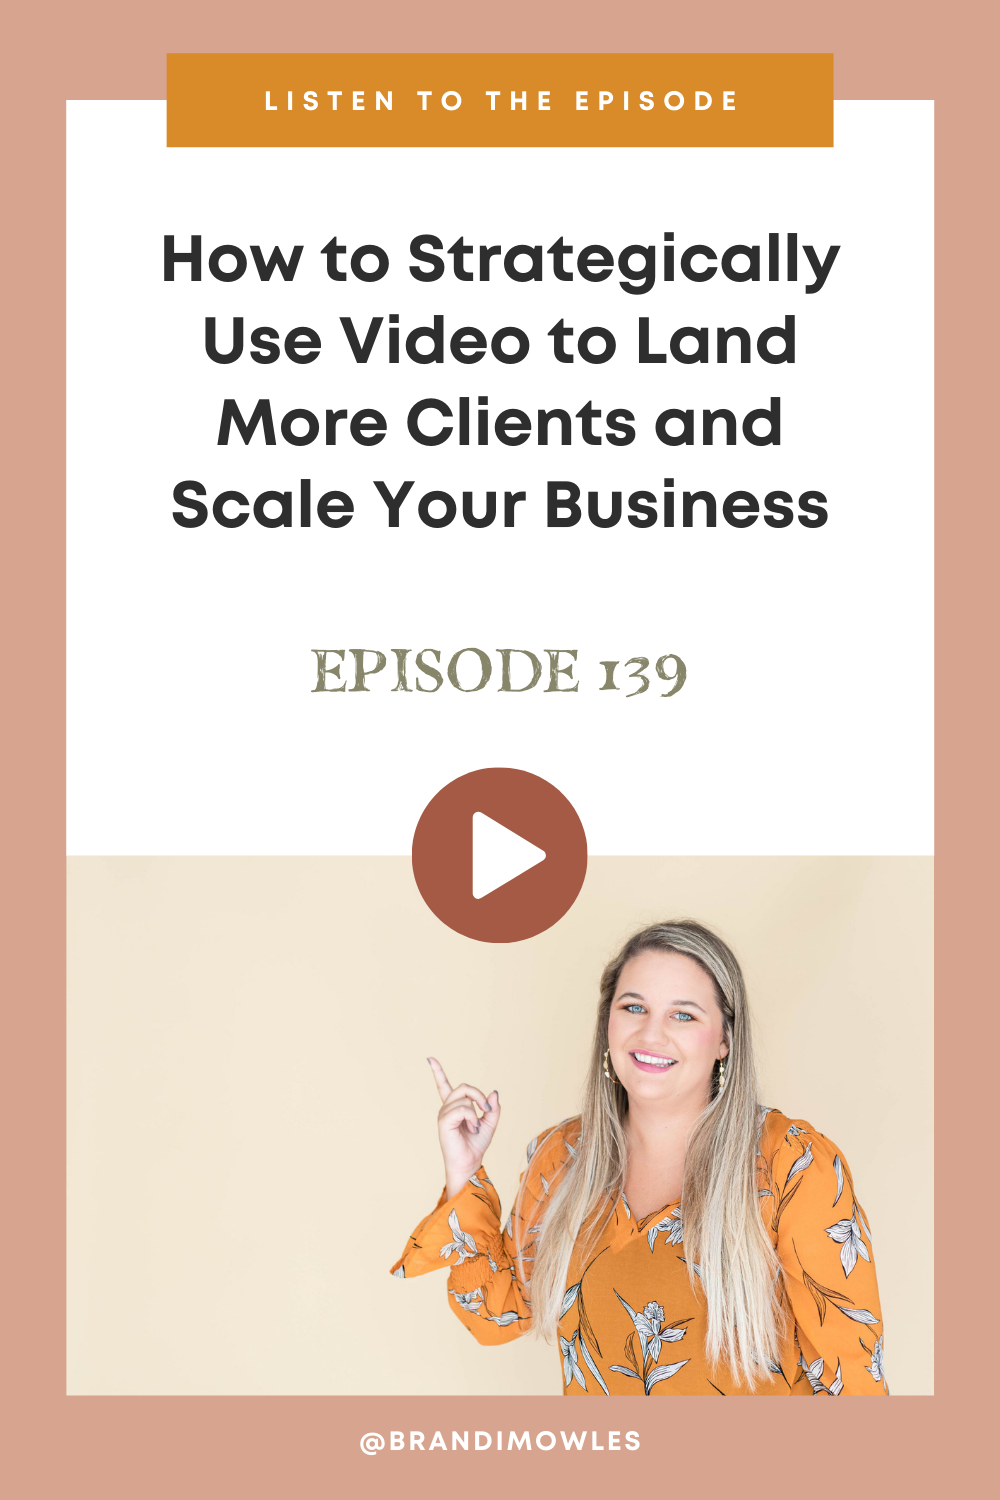 Brandi Mowles podcast episode feature about using video